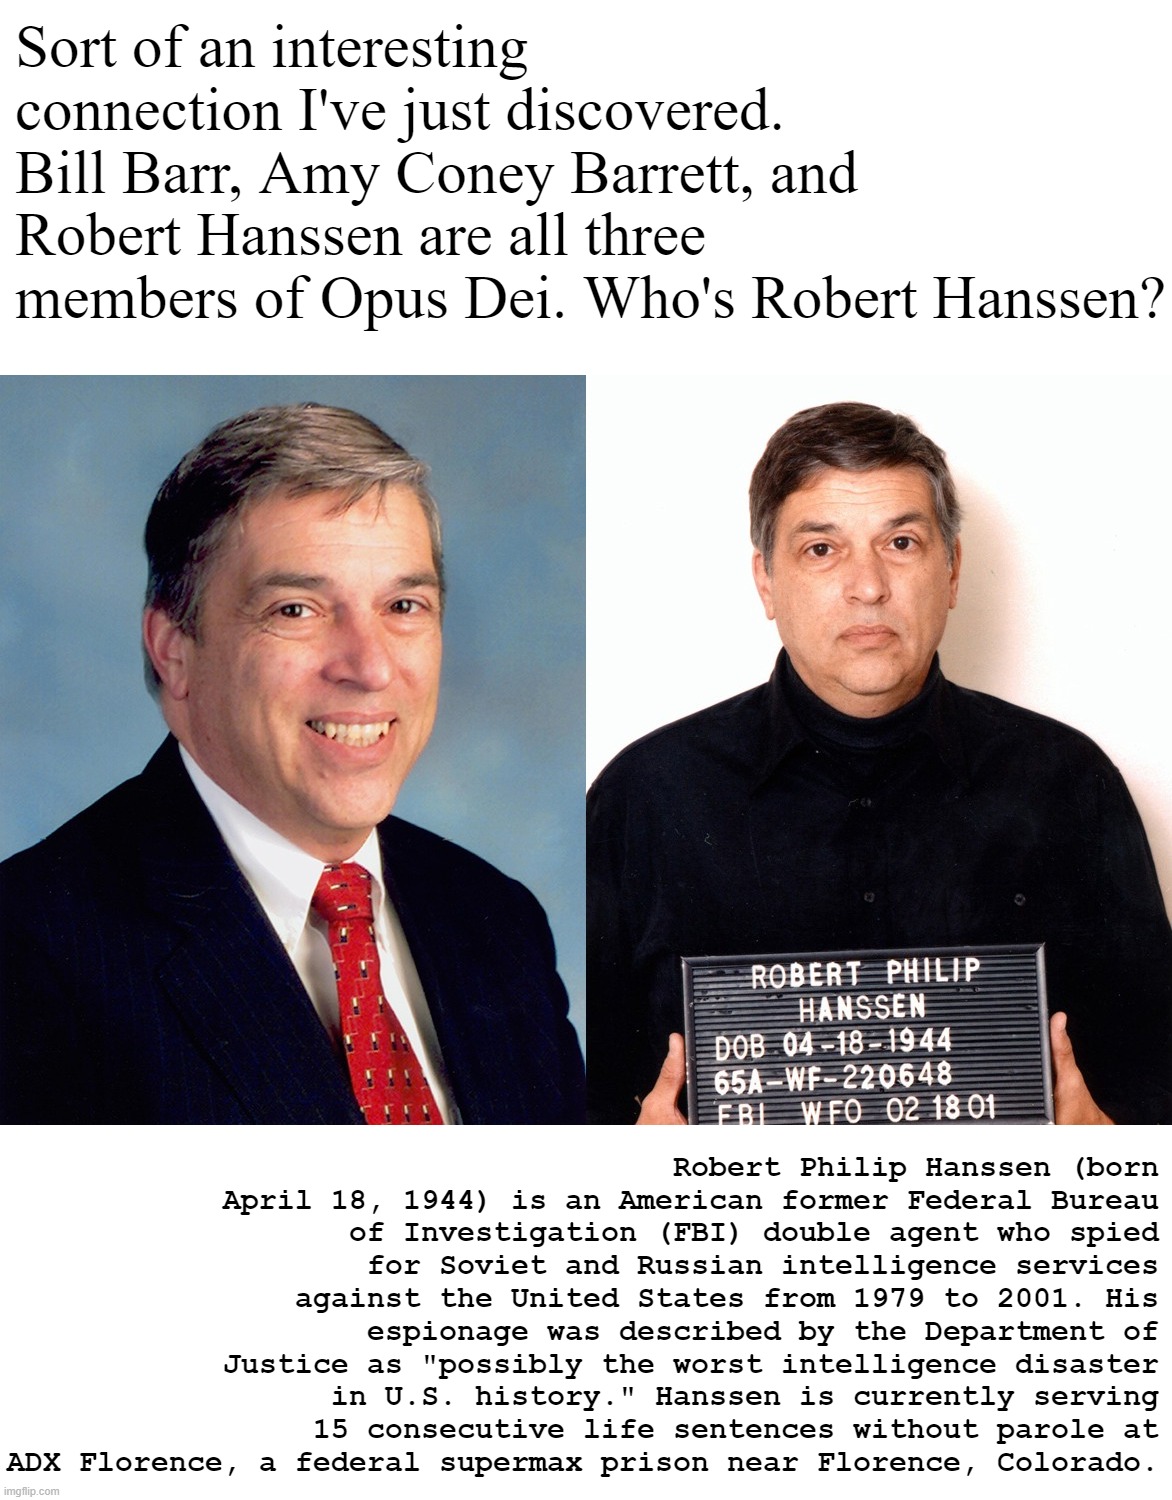 Troll of the Day: Robert Philip Hanssen | Sort of an interesting connection I've just discovered. Bill Barr, Amy Coney Barrett, and Robert Hanssen are all three members of Opus Dei. Who's Robert Hanssen? Robert Philip Hanssen (born April 18, 1944) is an American former Federal Bureau of Investigation (FBI) double agent who spied for Soviet and Russian intelligence services against the United States from 1979 to 2001. His espionage was described by the Department of Justice as "possibly the worst intelligence disaster in U.S. history." Hanssen is currently serving 15 consecutive life sentences without parole at ADX Florence, a federal supermax prison near Florence, Colorado. | image tagged in robert hanssen traitor,traitor,treason,traitors | made w/ Imgflip meme maker